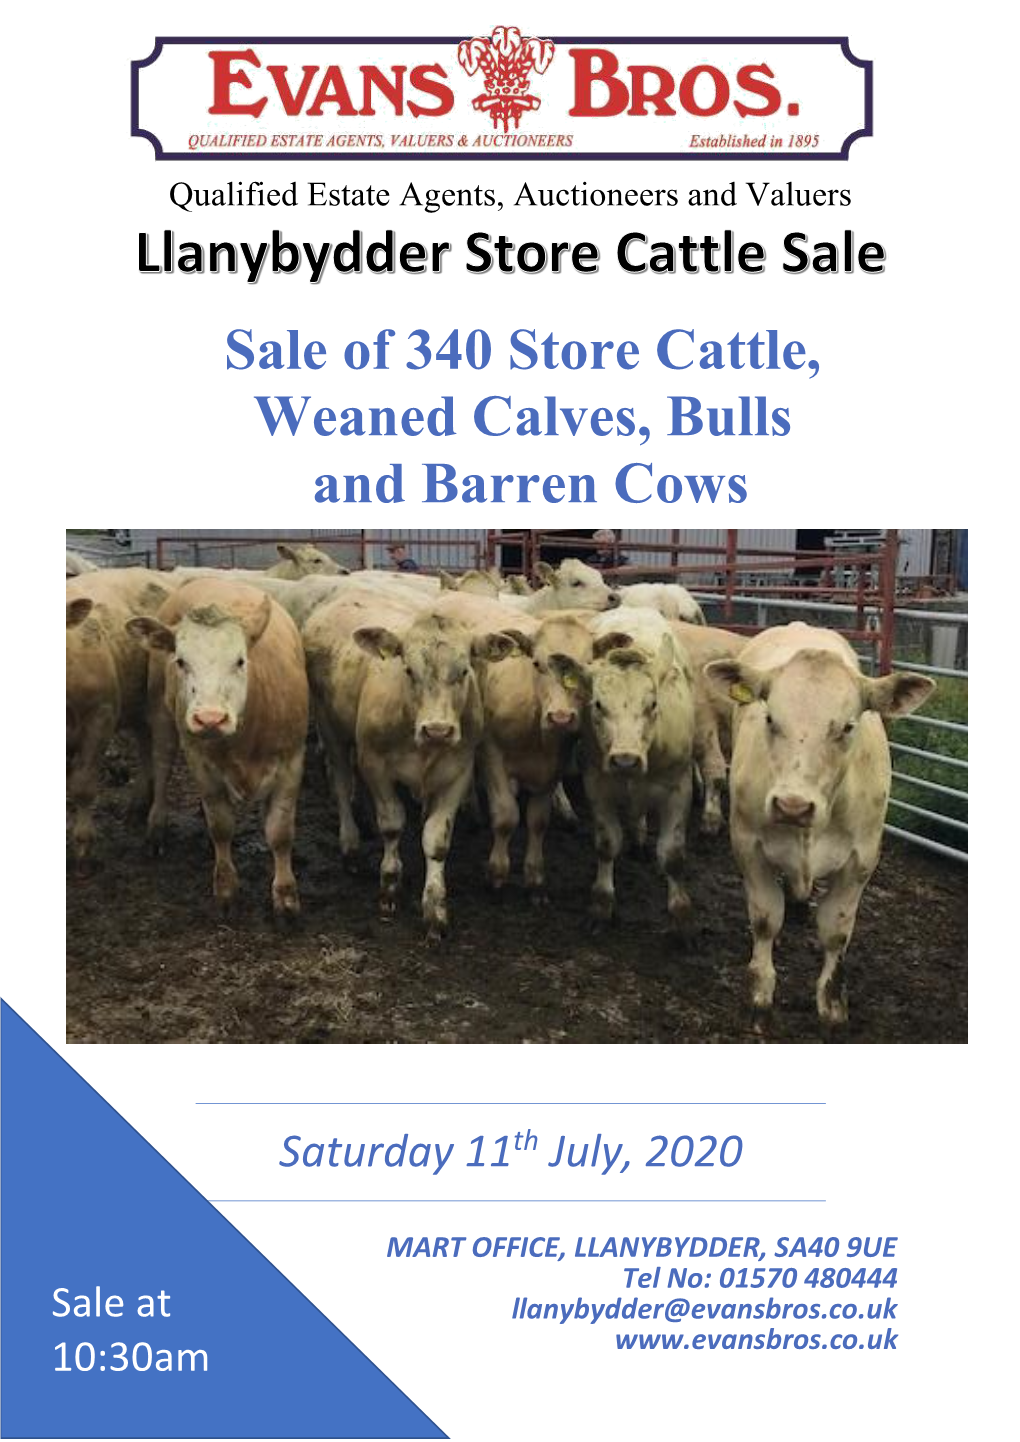 Sale of 340 Store Cattle, Weaned Calves, Bulls and Barren Cows